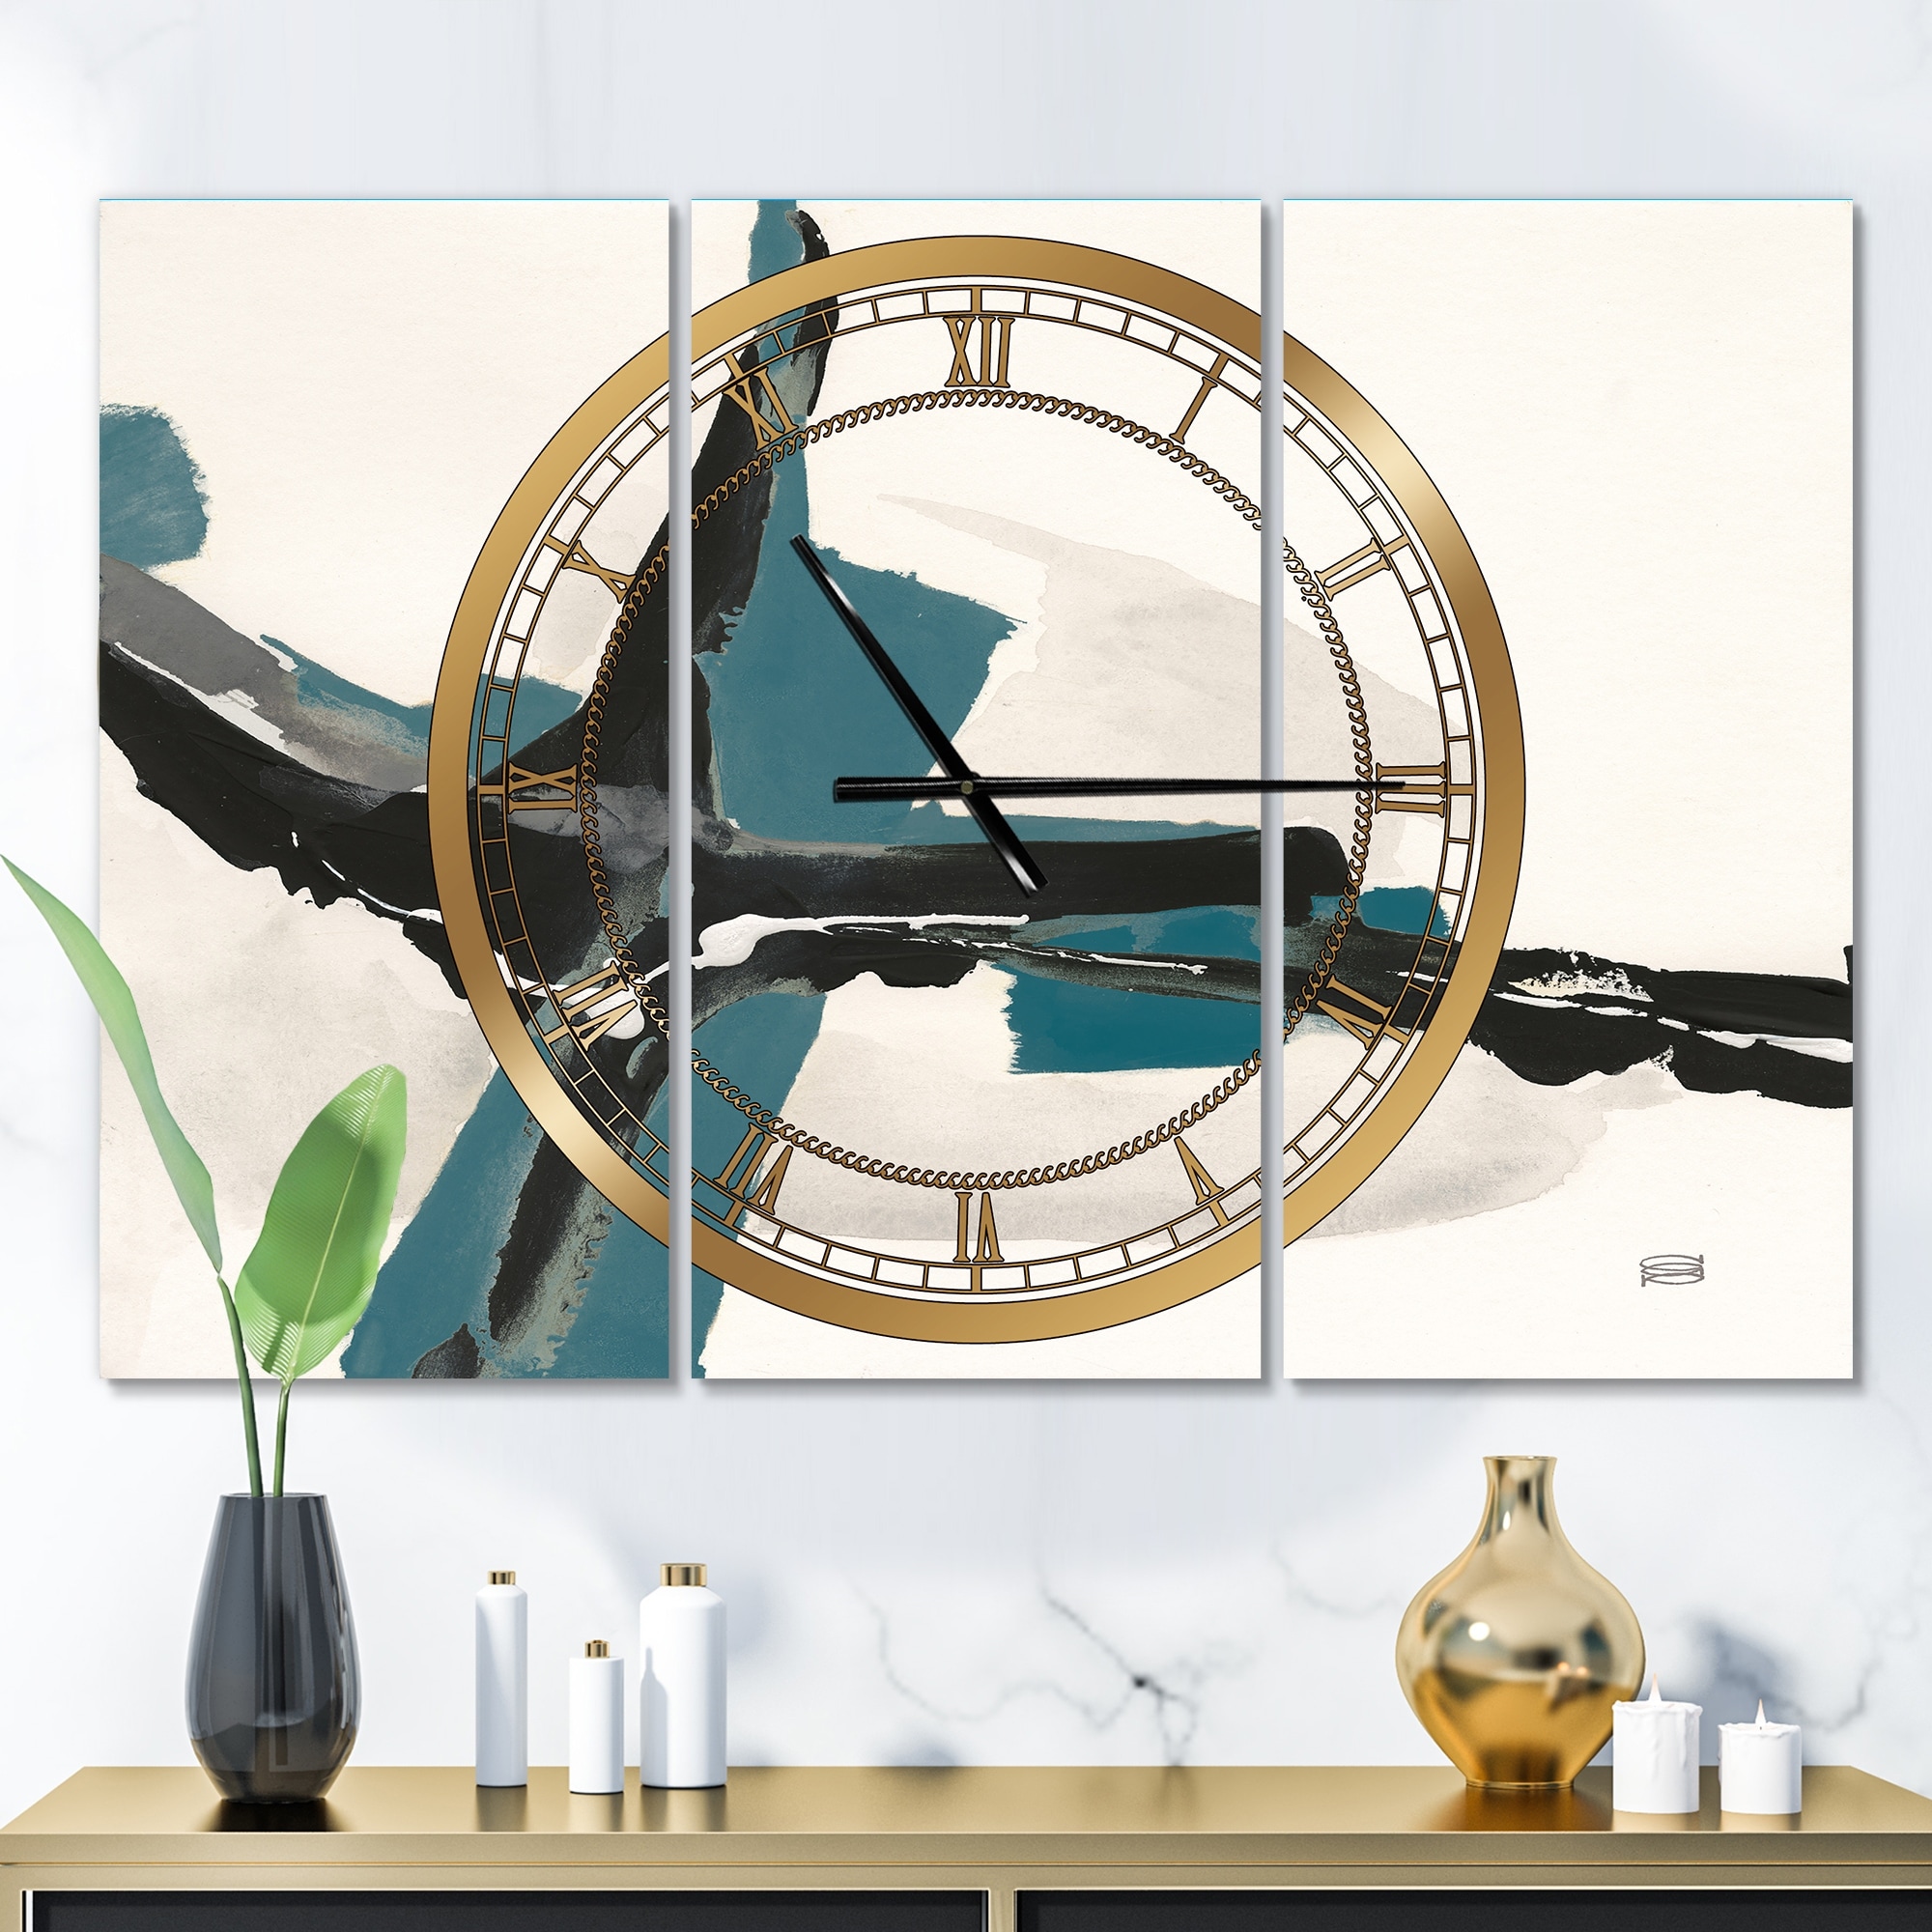 Designart 'Glam Cerulean I' Glam 3 Panels Oversized Wall CLock - 36 in. wide x 28 in. high - 3 panels